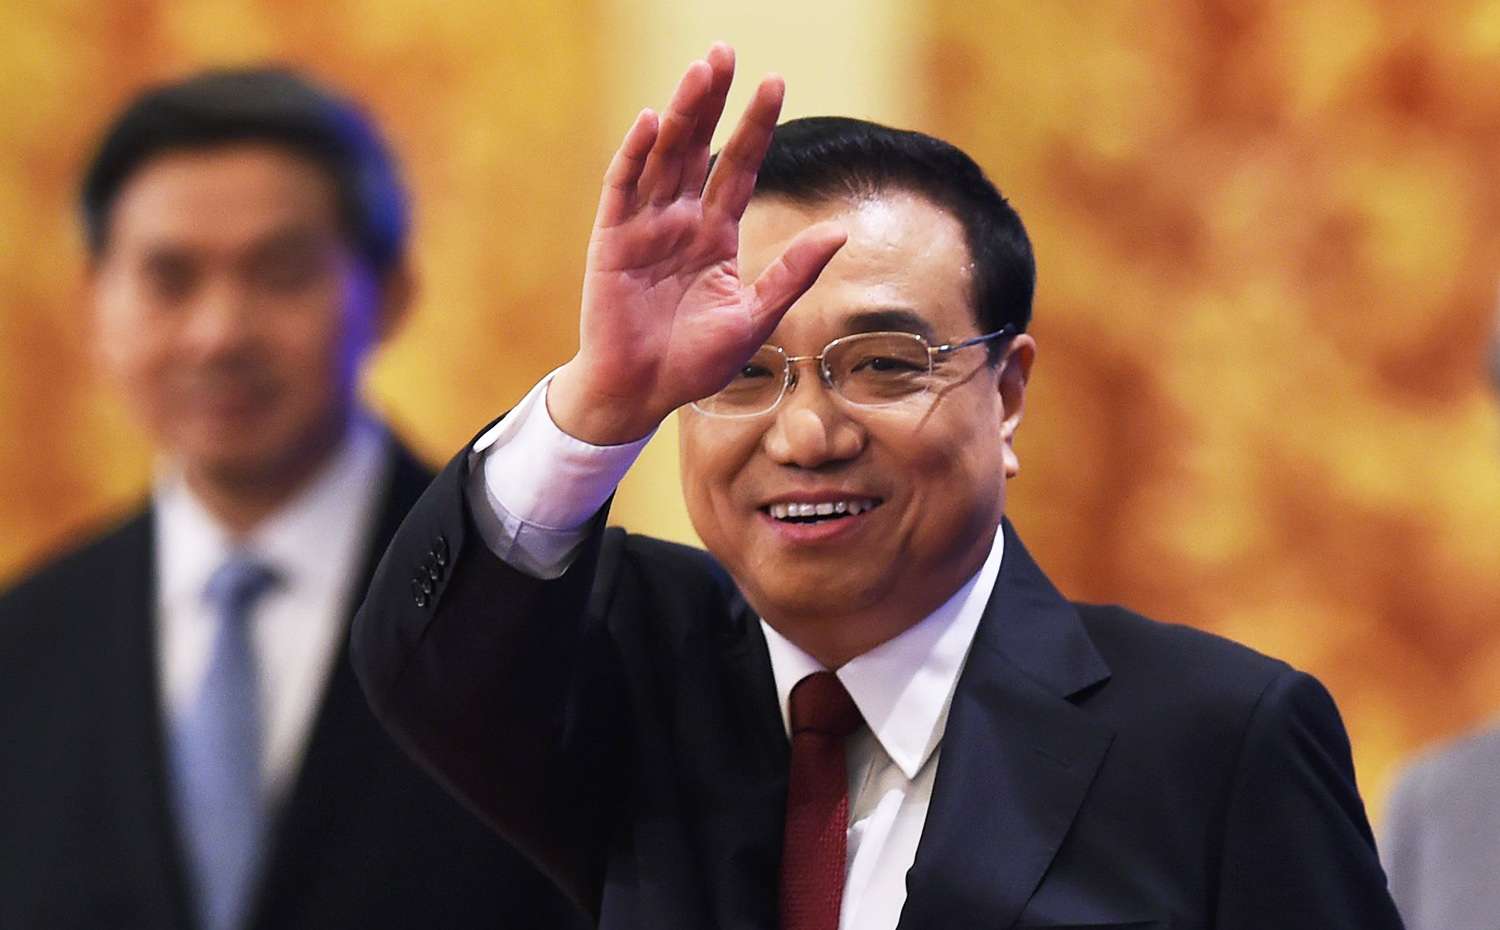 Chinese Premier Li Keqiang waves as he arrives for a press conference. Photo: AFP